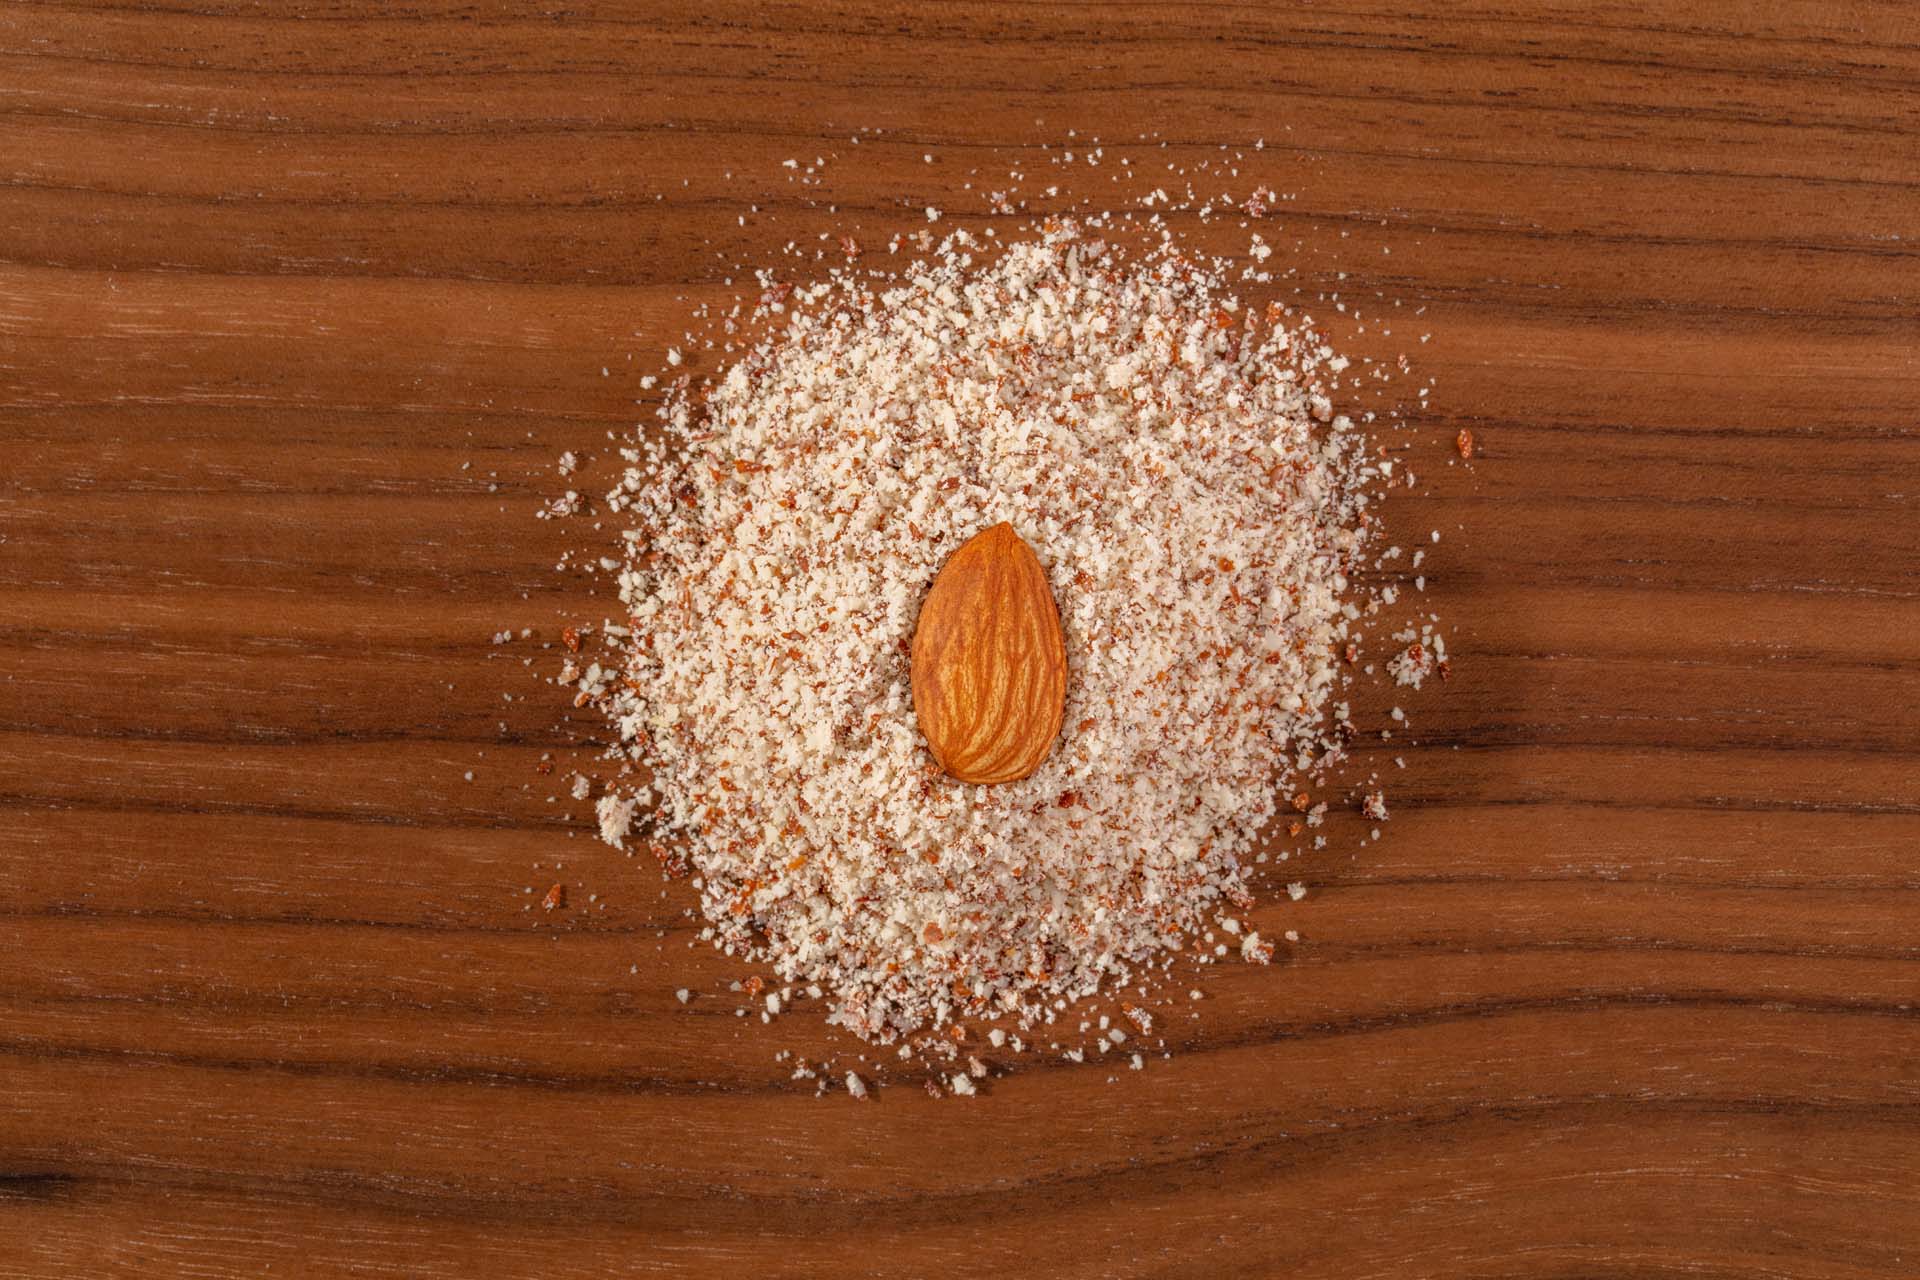 whole Almond in a Pile of Natural Almond Flour